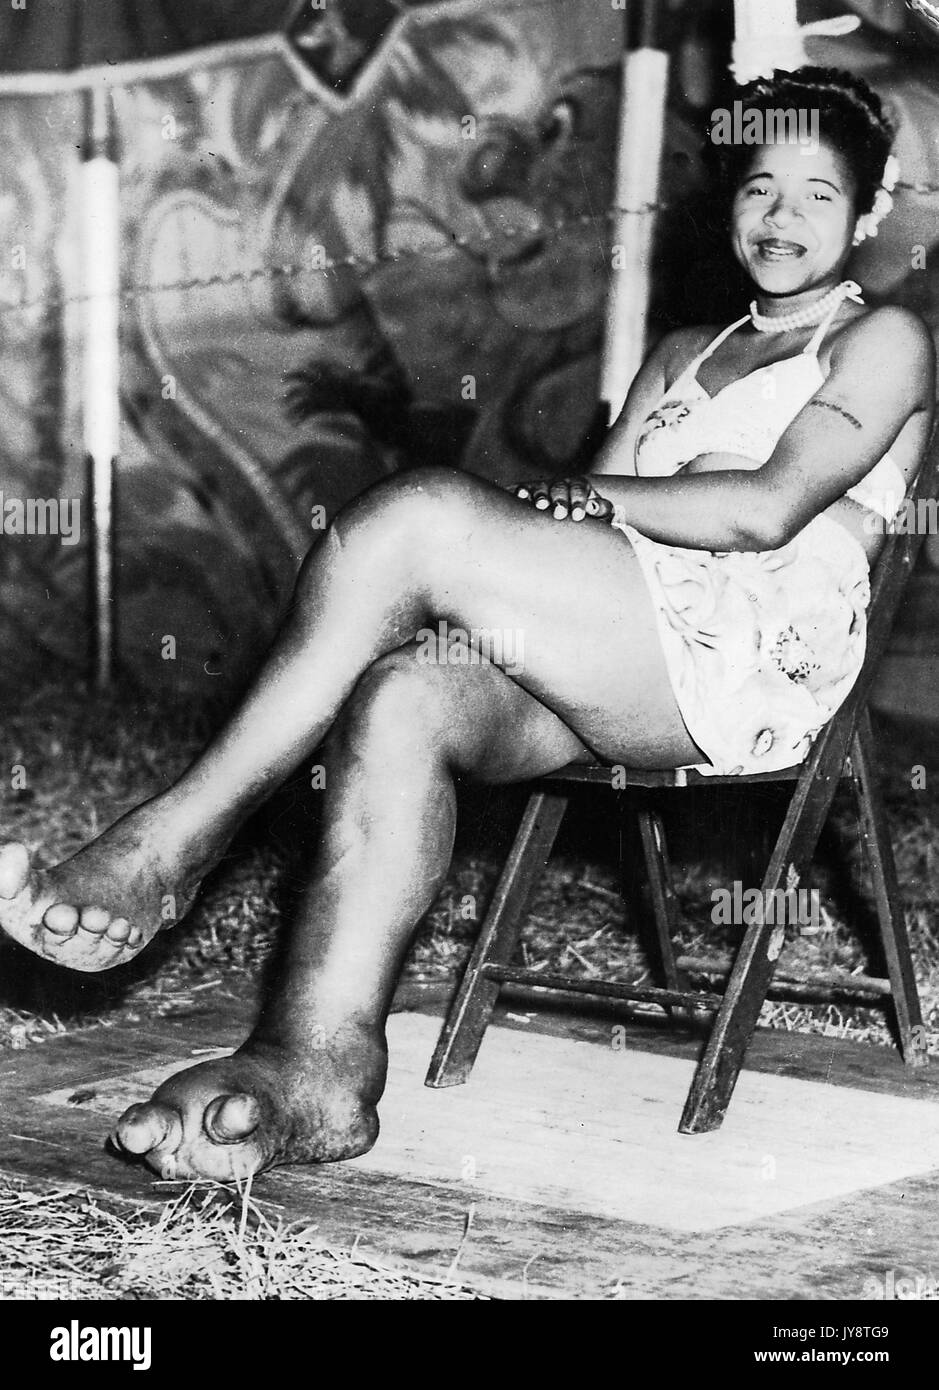 African American sideshow circus entertainer Sylvia Portis, known as Sylvia the Elephant Girl, smiling and displaying her feet, which are deformed and show signs of the disease elephantiasis, 1944. Stock Photo